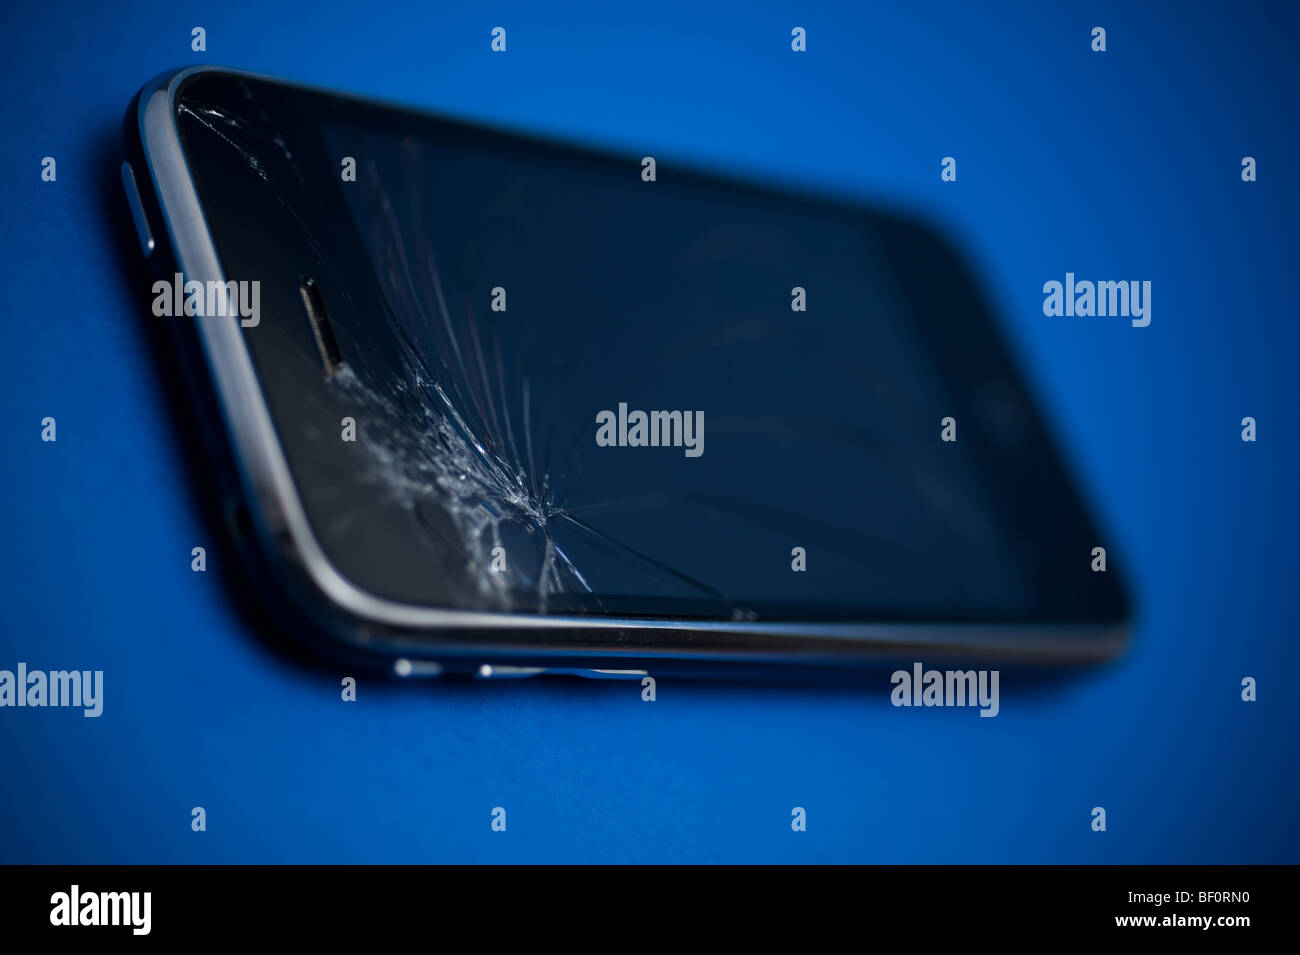 A damaged Apple iPhone device placed on a blue backround.  The main control screen has been cracked at the top. Stock Photo